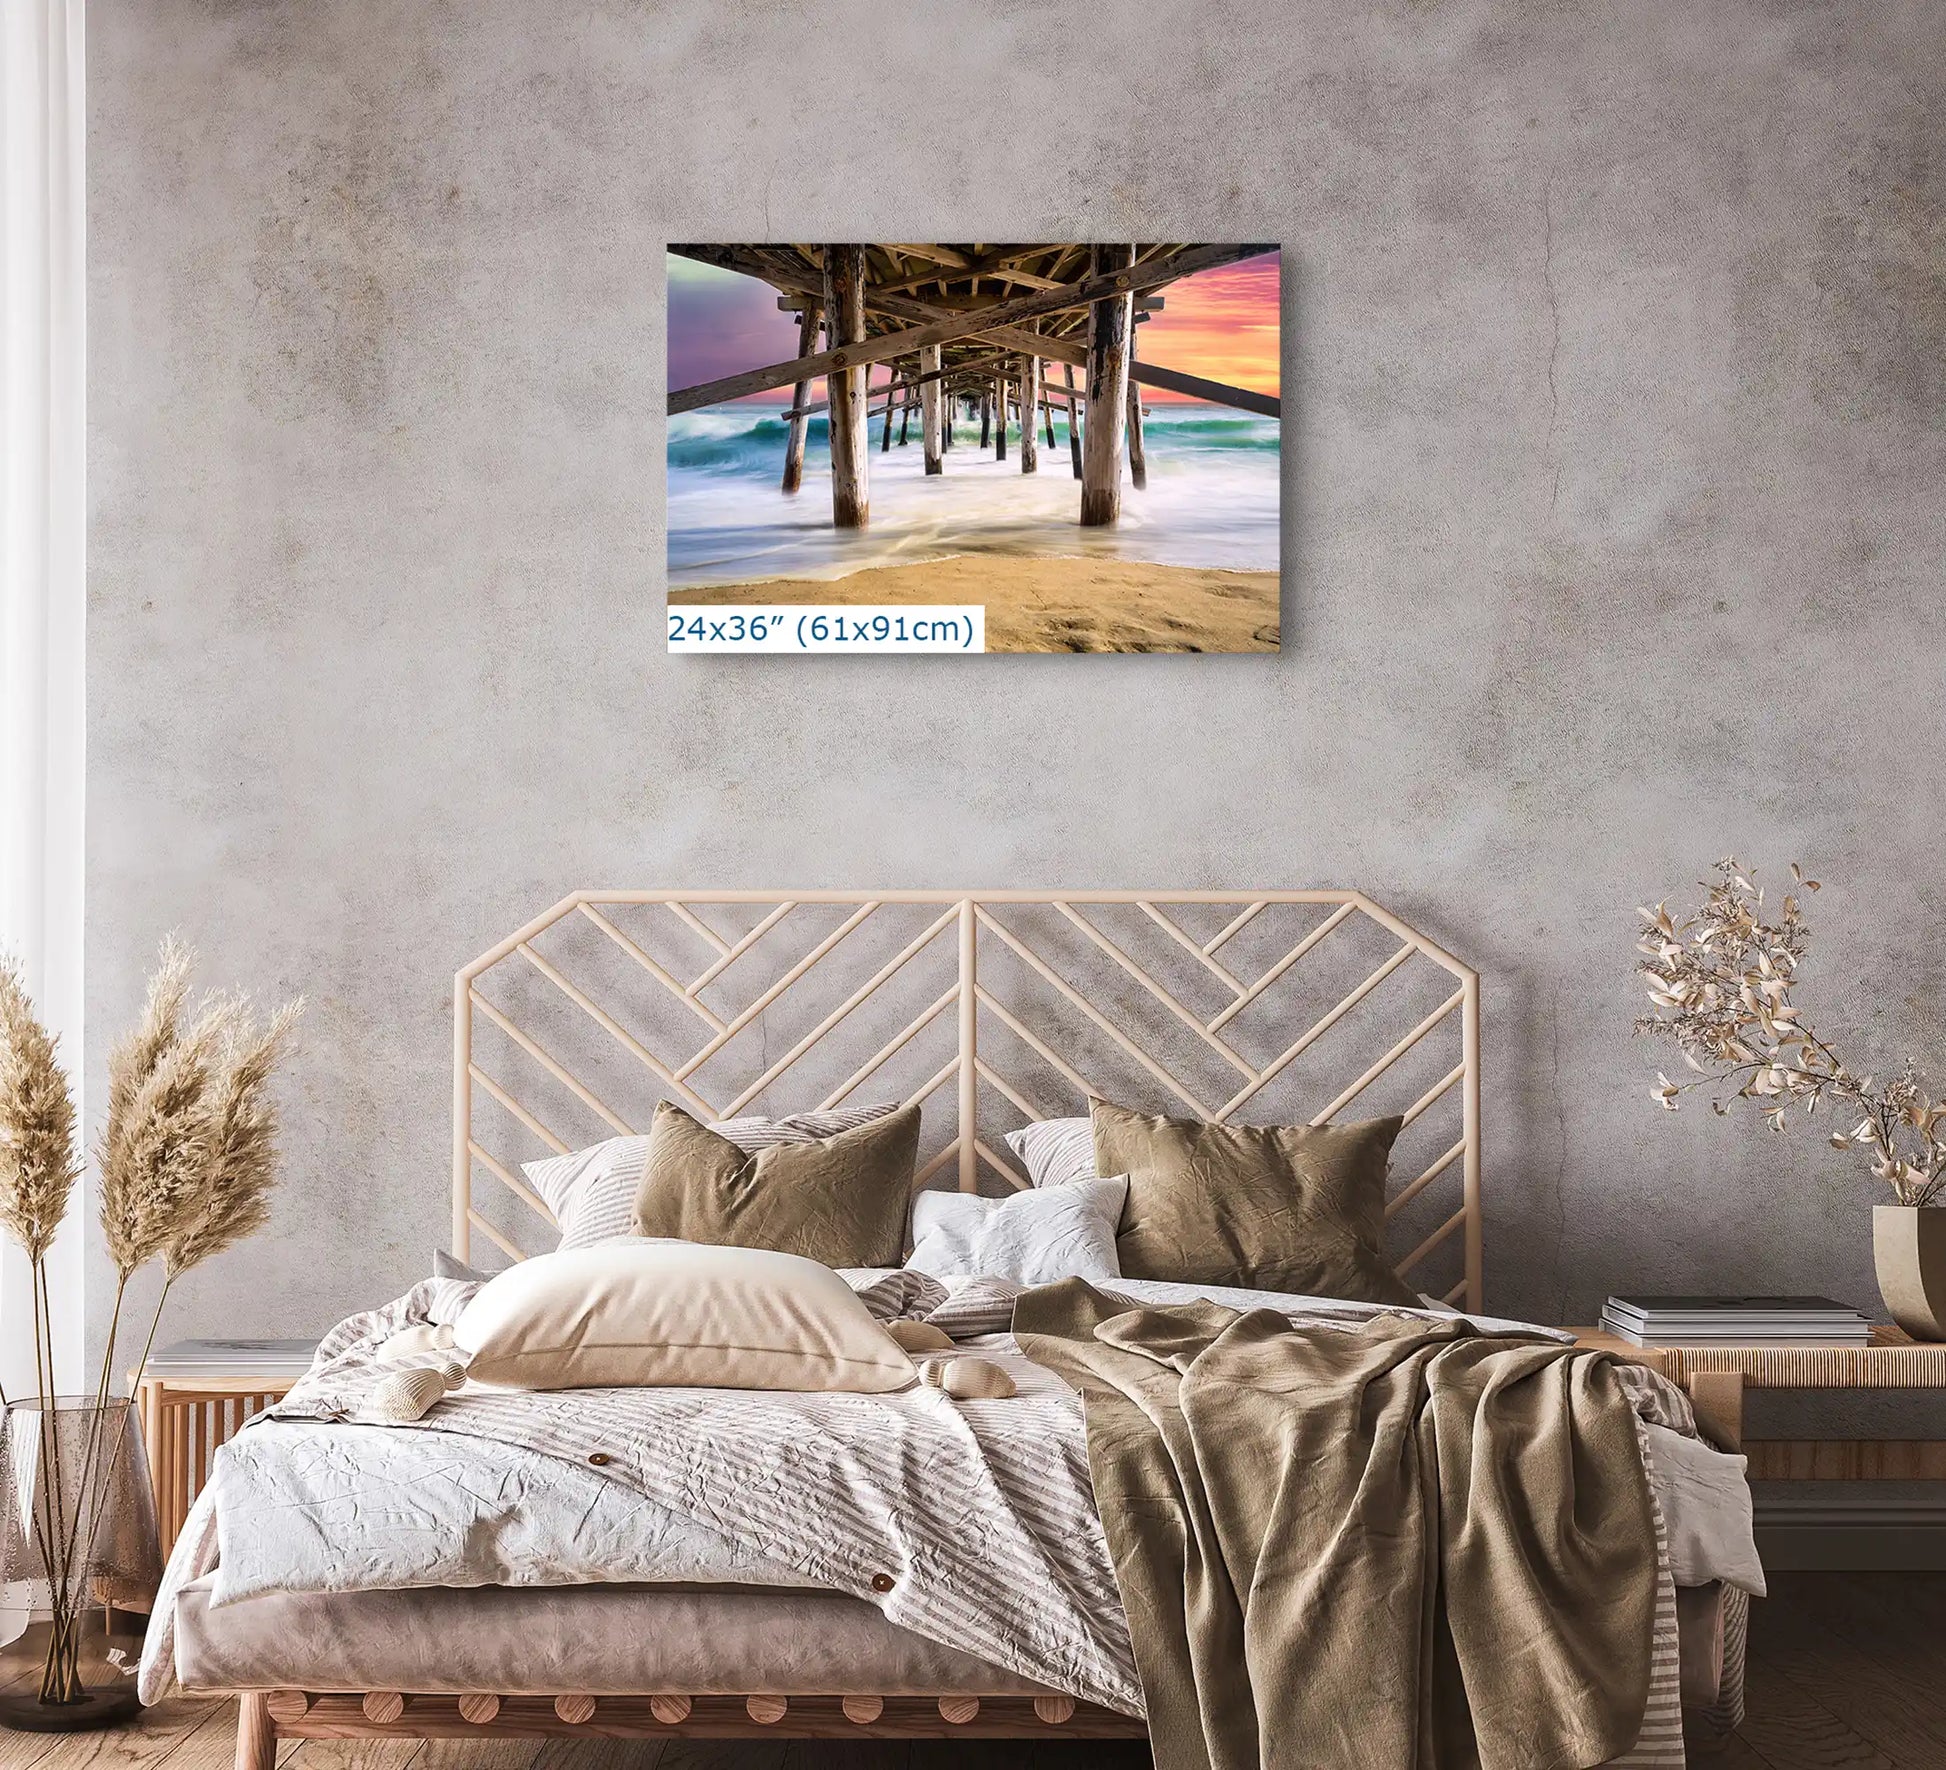 Large canvas wall art in 24x36-inches above a bed, featuring the Balboa Pier at sunset, creating a calm and relaxing bedroom atmosphere.